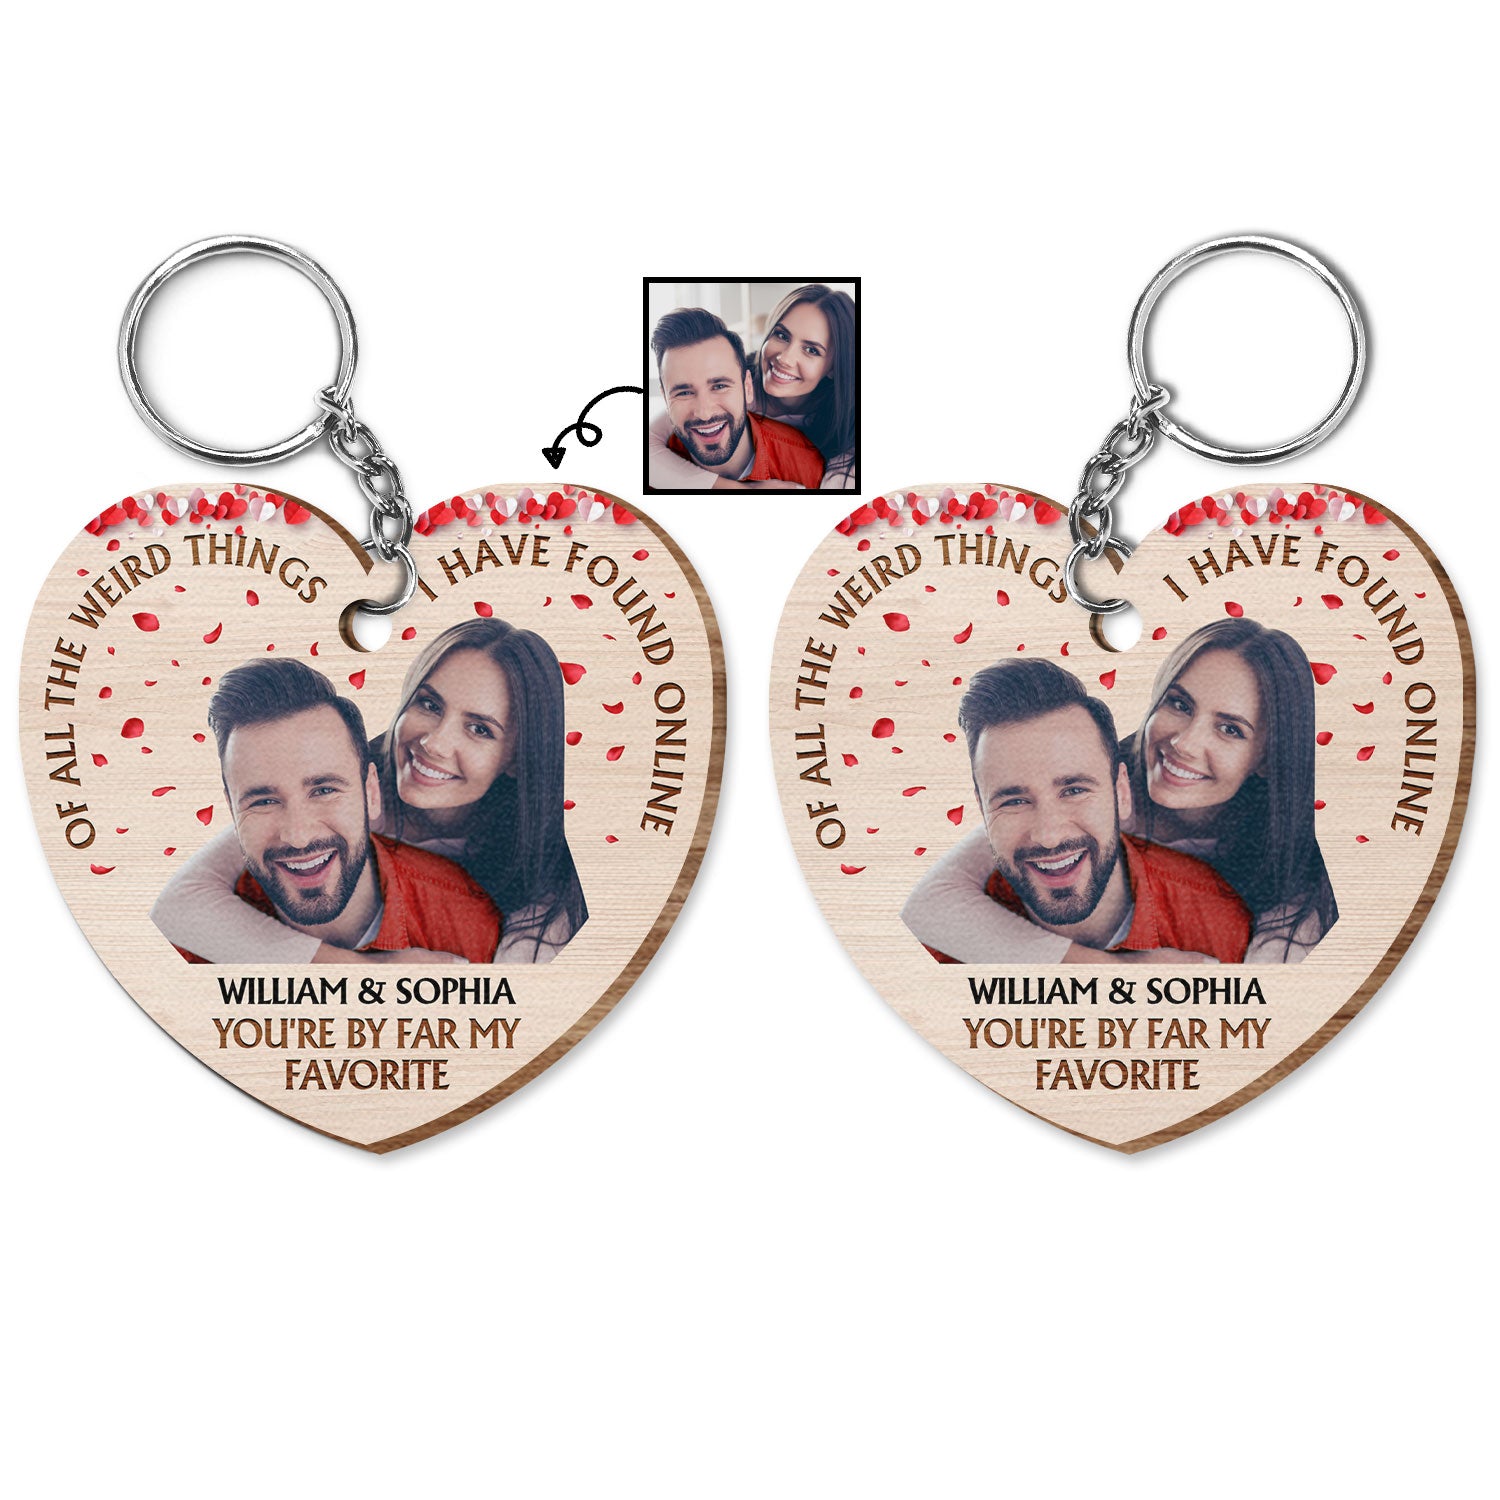 Custom Photo Of All The Weird Thing - Birthday, Anniversary Gift For Spouse, Husband, Wife, Couple - Personalized Wooden Keychain